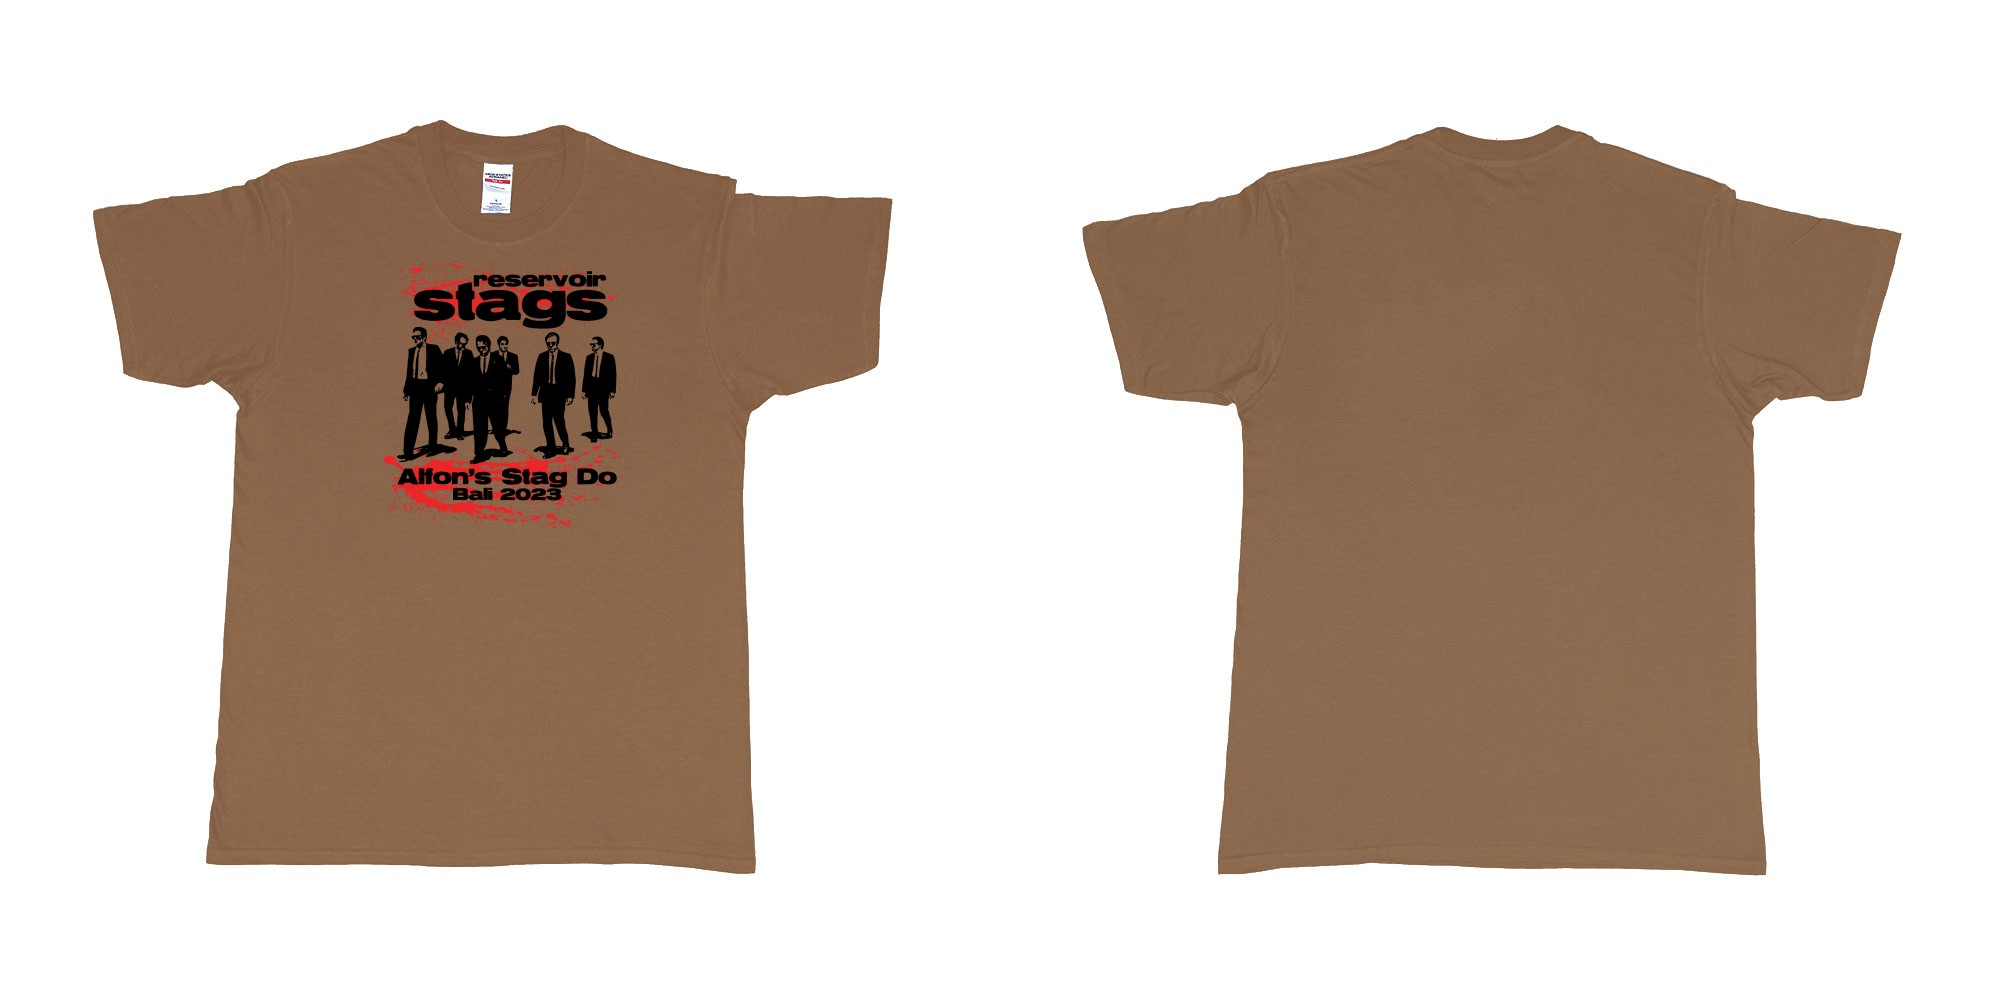 Custom tshirt design Reservoir Dogs Stag in fabric color chestnut choice your own text made in Bali by The Pirate Way